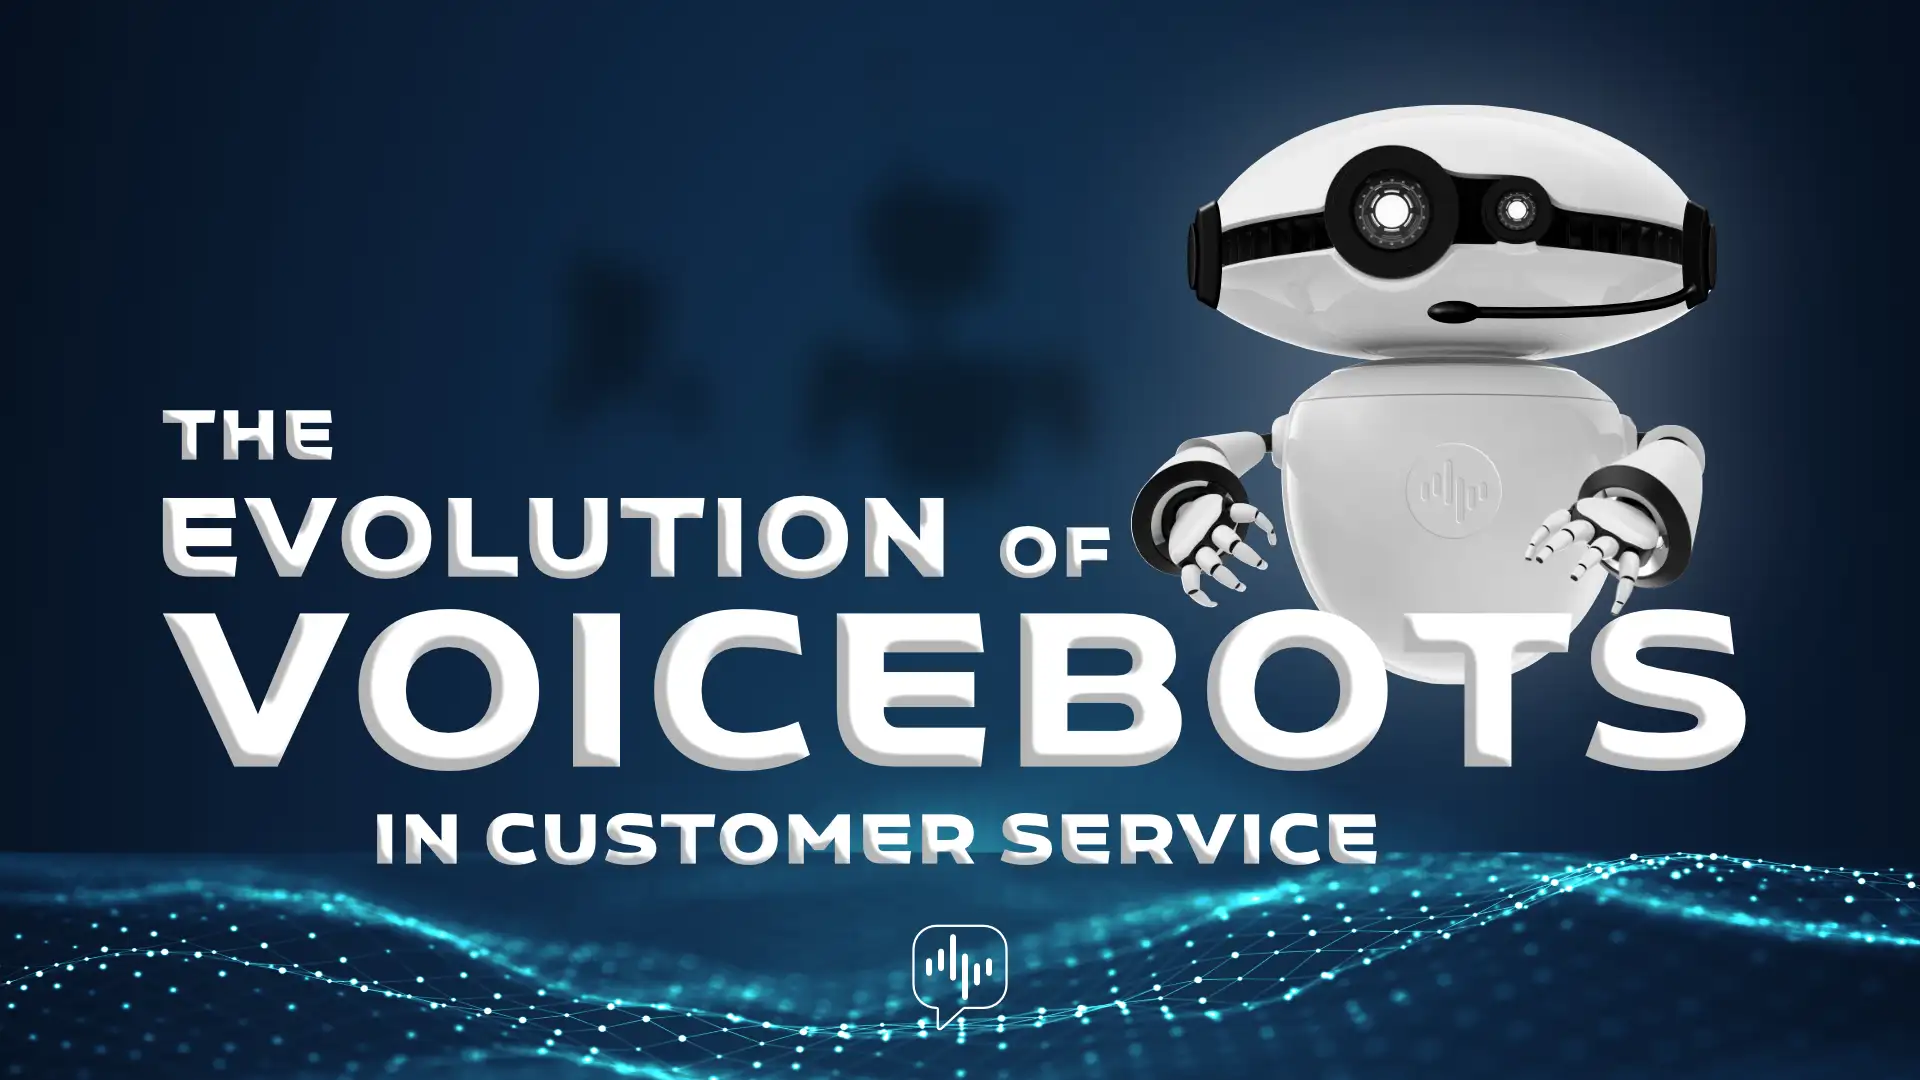 The evolution of voicebots in customer service